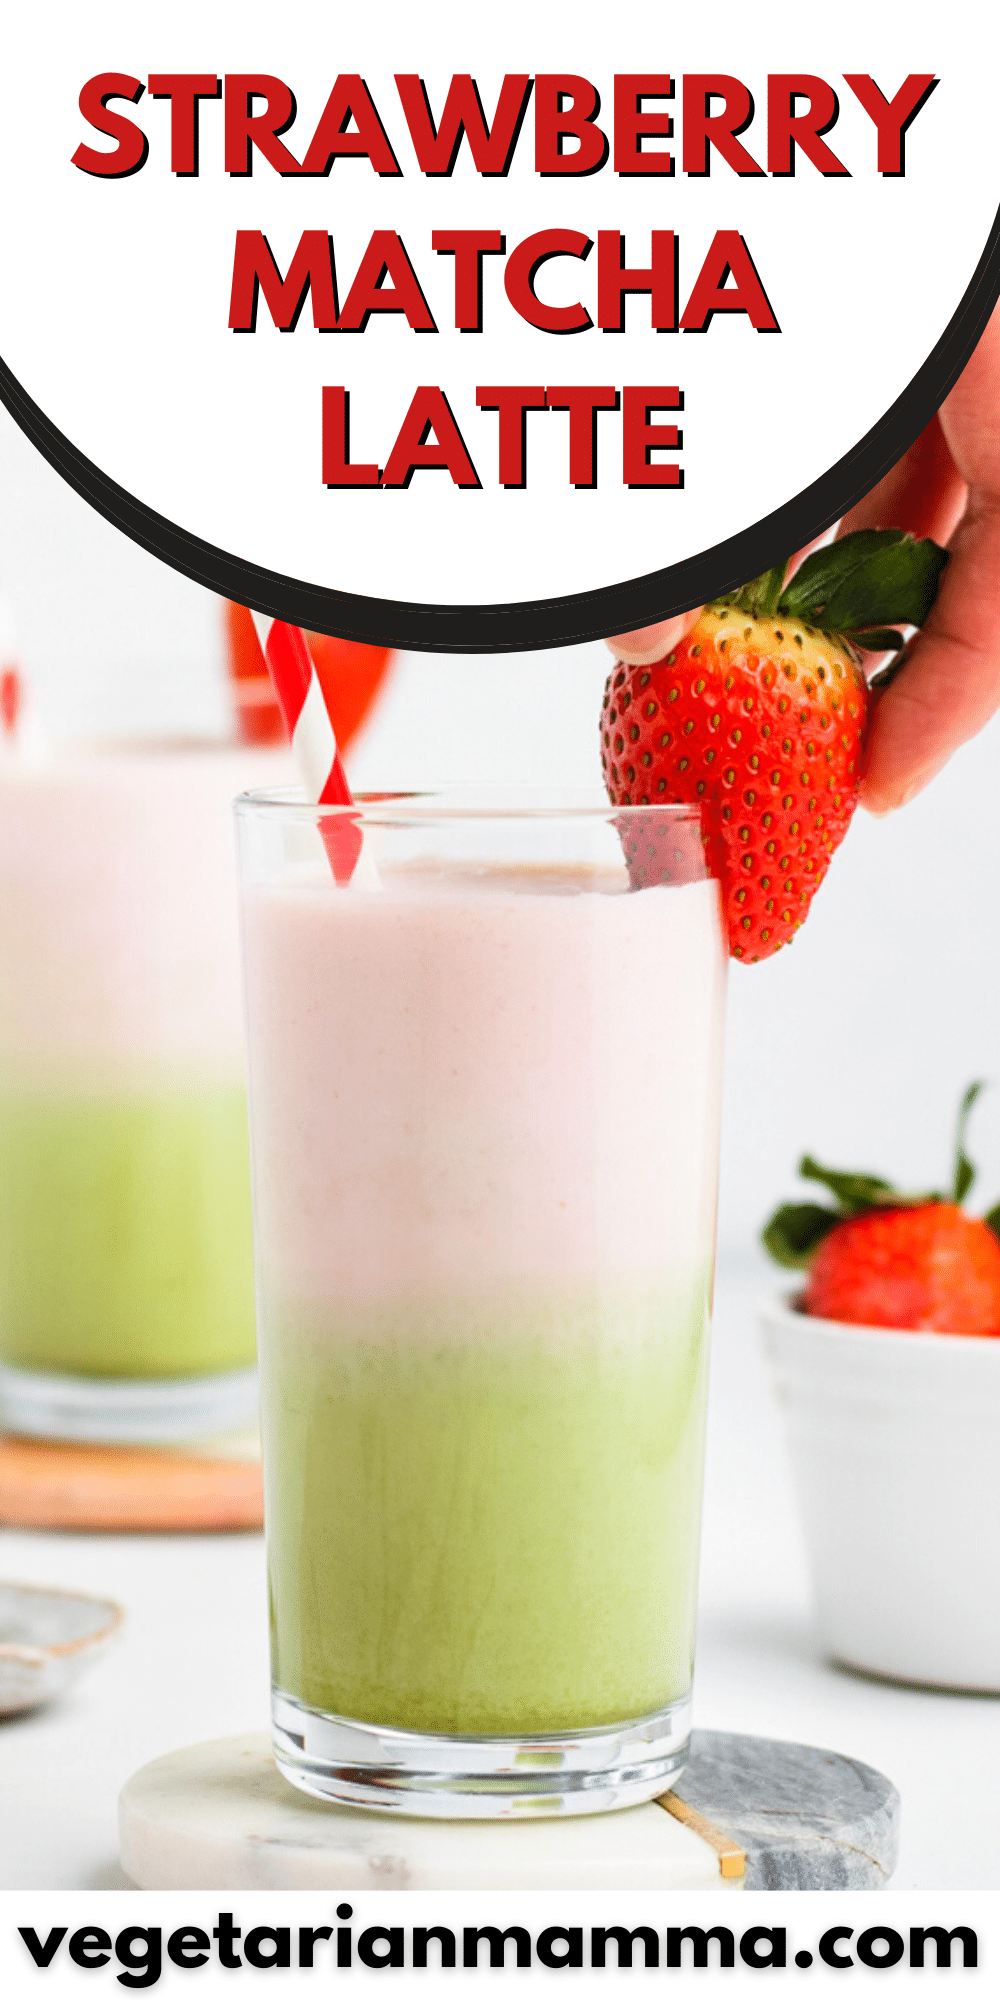 If you love strawberries and are a fan of iced matcha lattes, then this easy recipe for a frothy, sweet, and refreshing Strawberry Matcha Latte will be perfect for you!